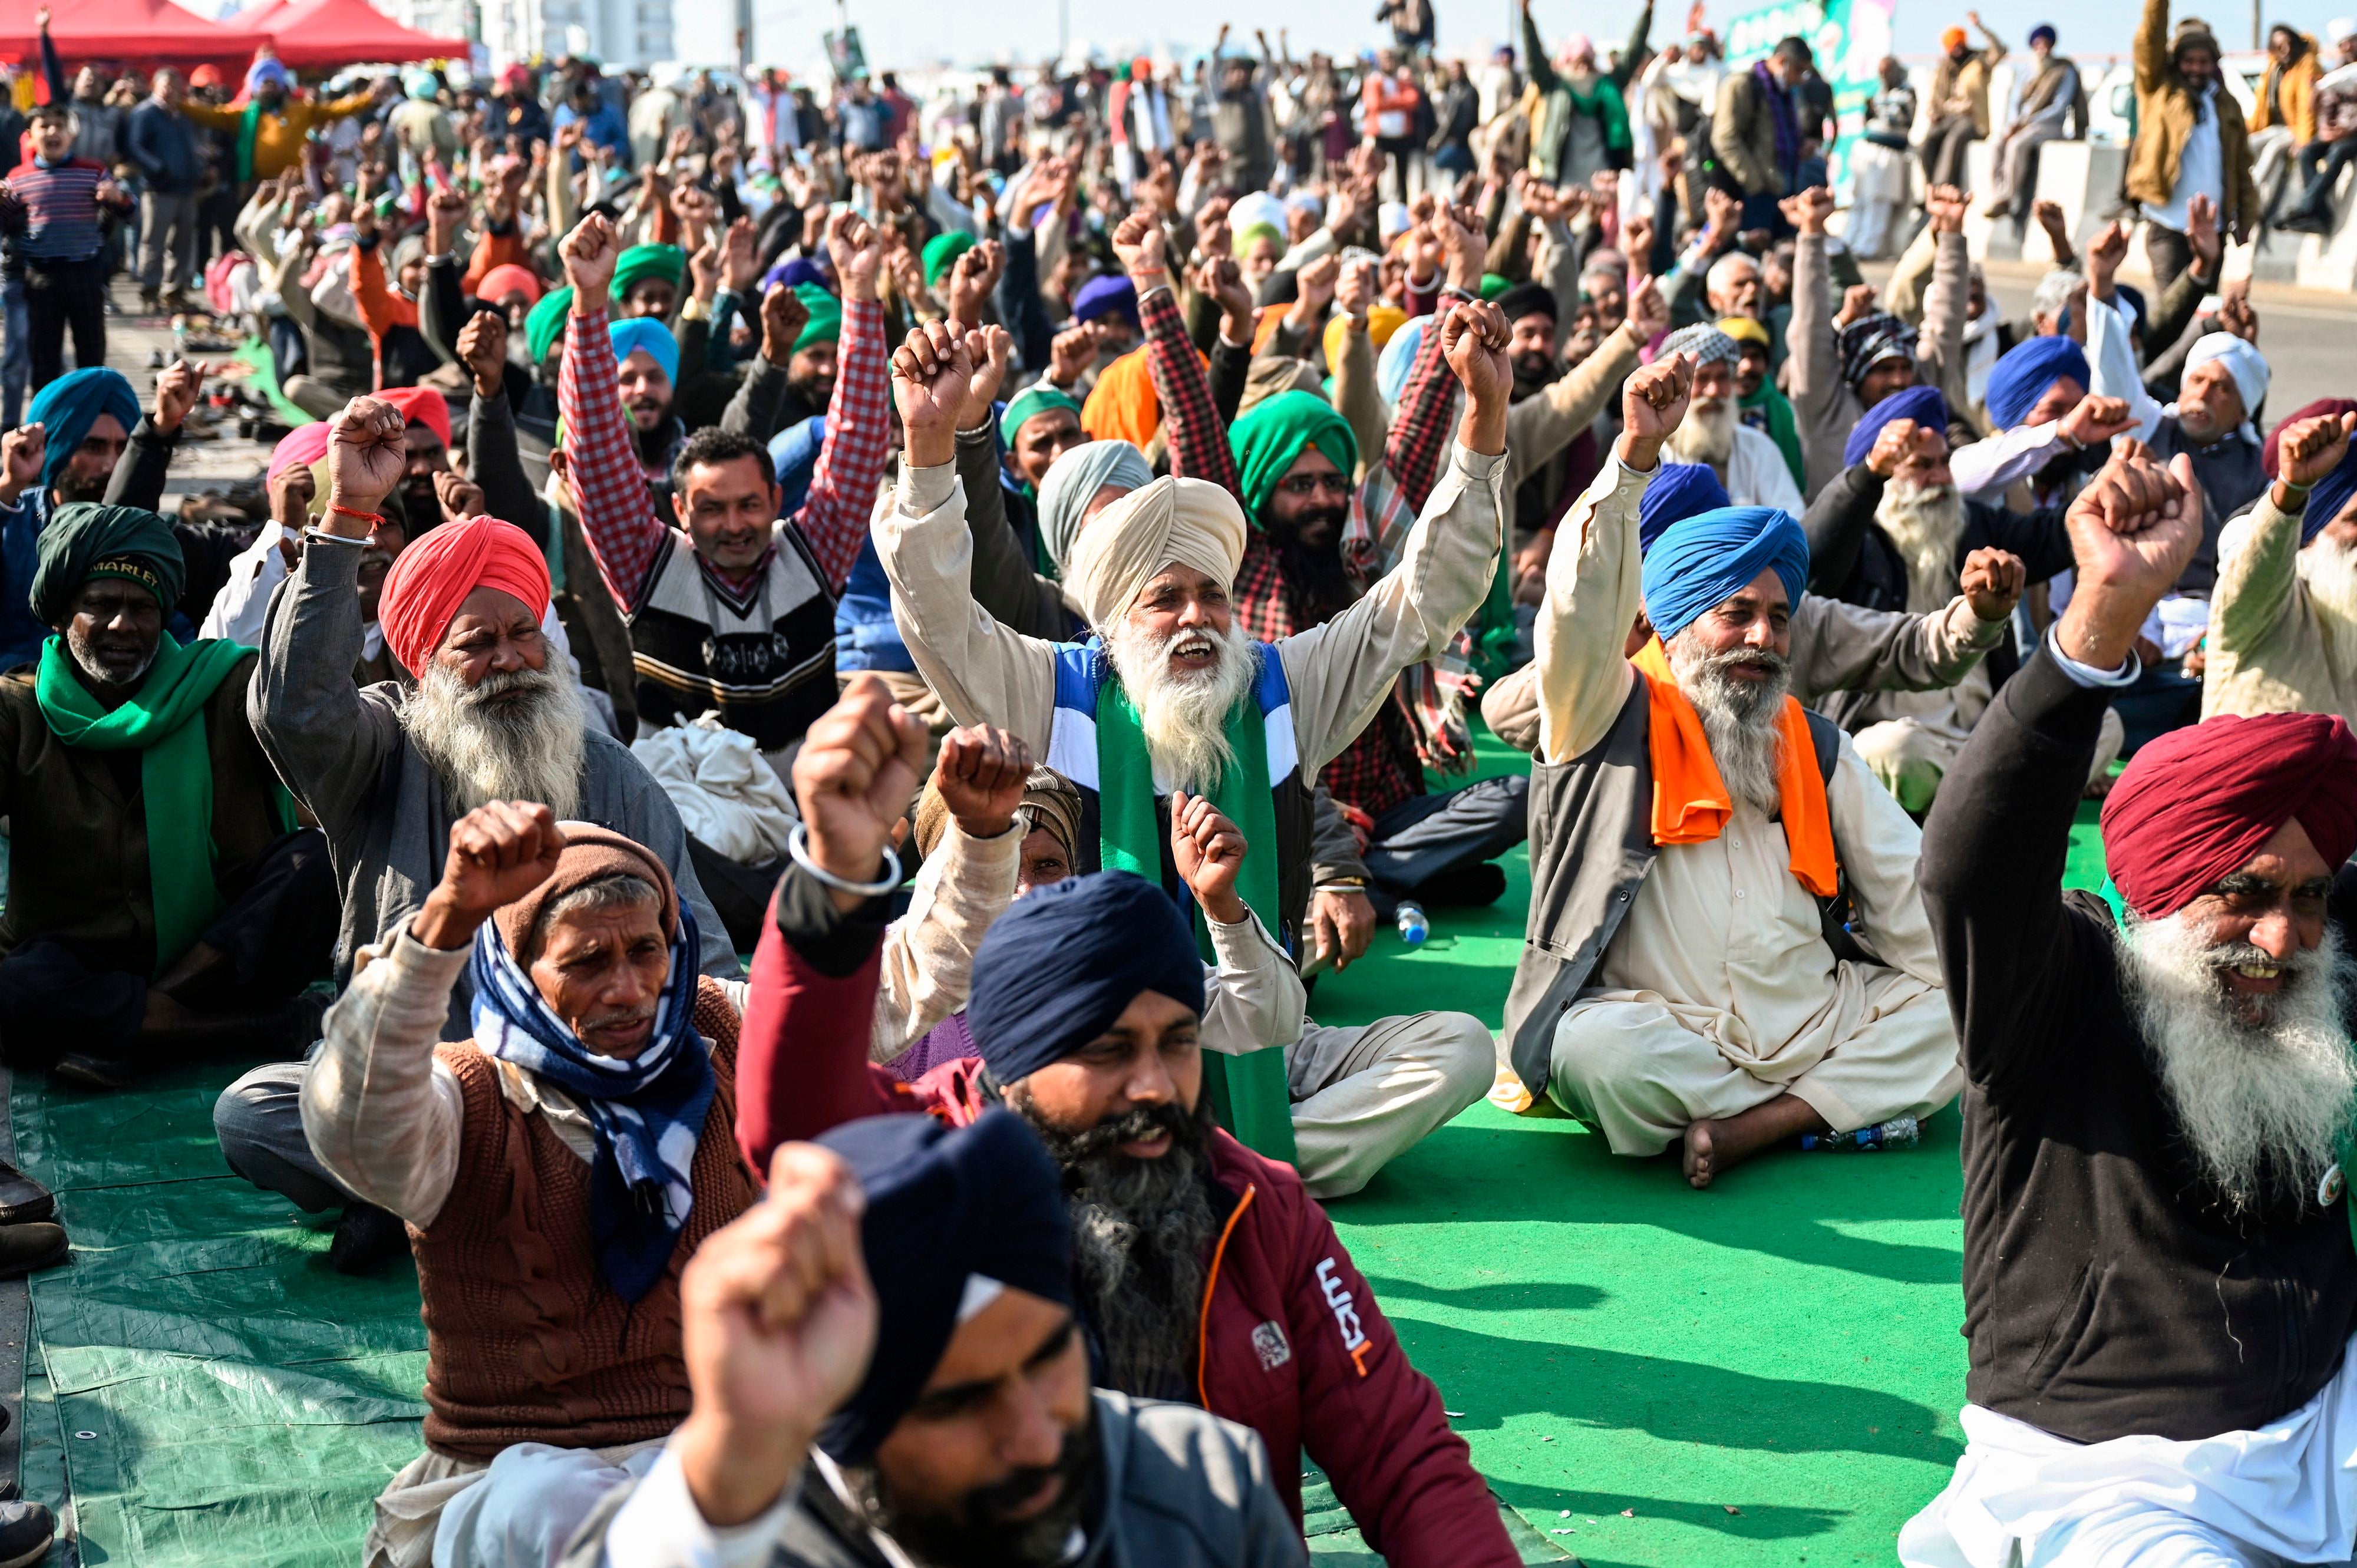 Protesting farmers shout slogans as they sit along a blocked highway during a protest against the central government's recent agricultural reforms at the Ghazipur Delhi-Uttar Pradesh state border in New Delhi on 11 January, 2021